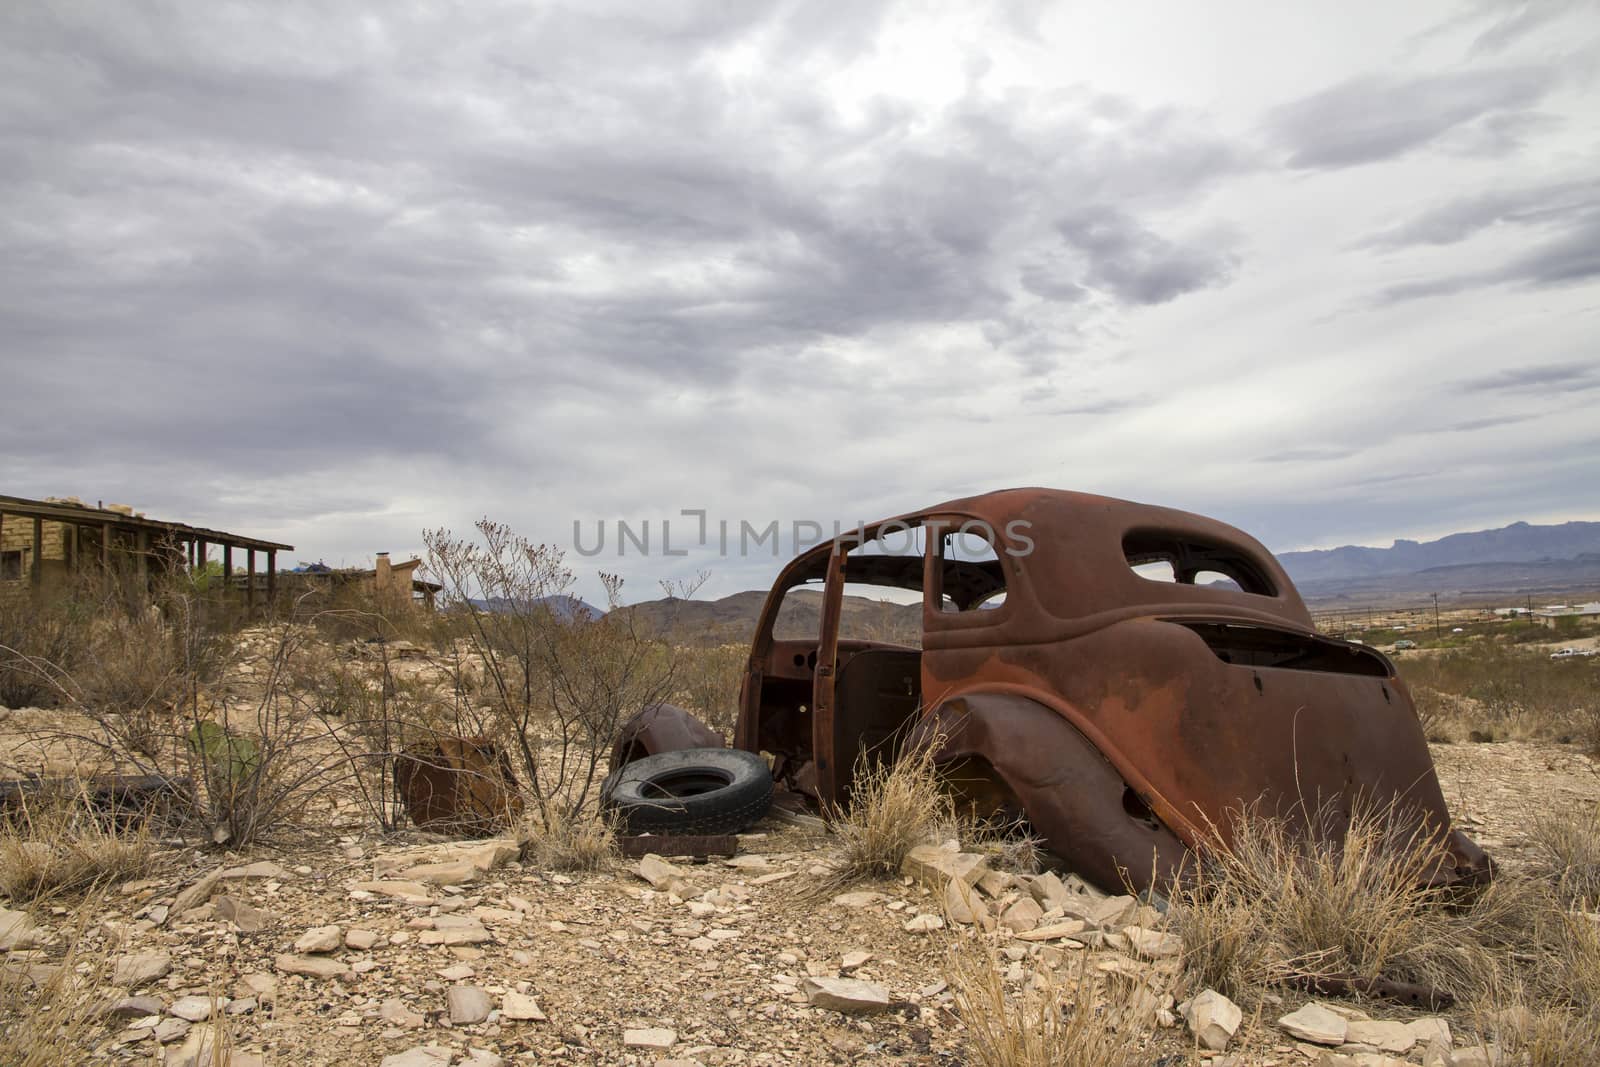 Texas Ghost Towns near Mexico Boarder